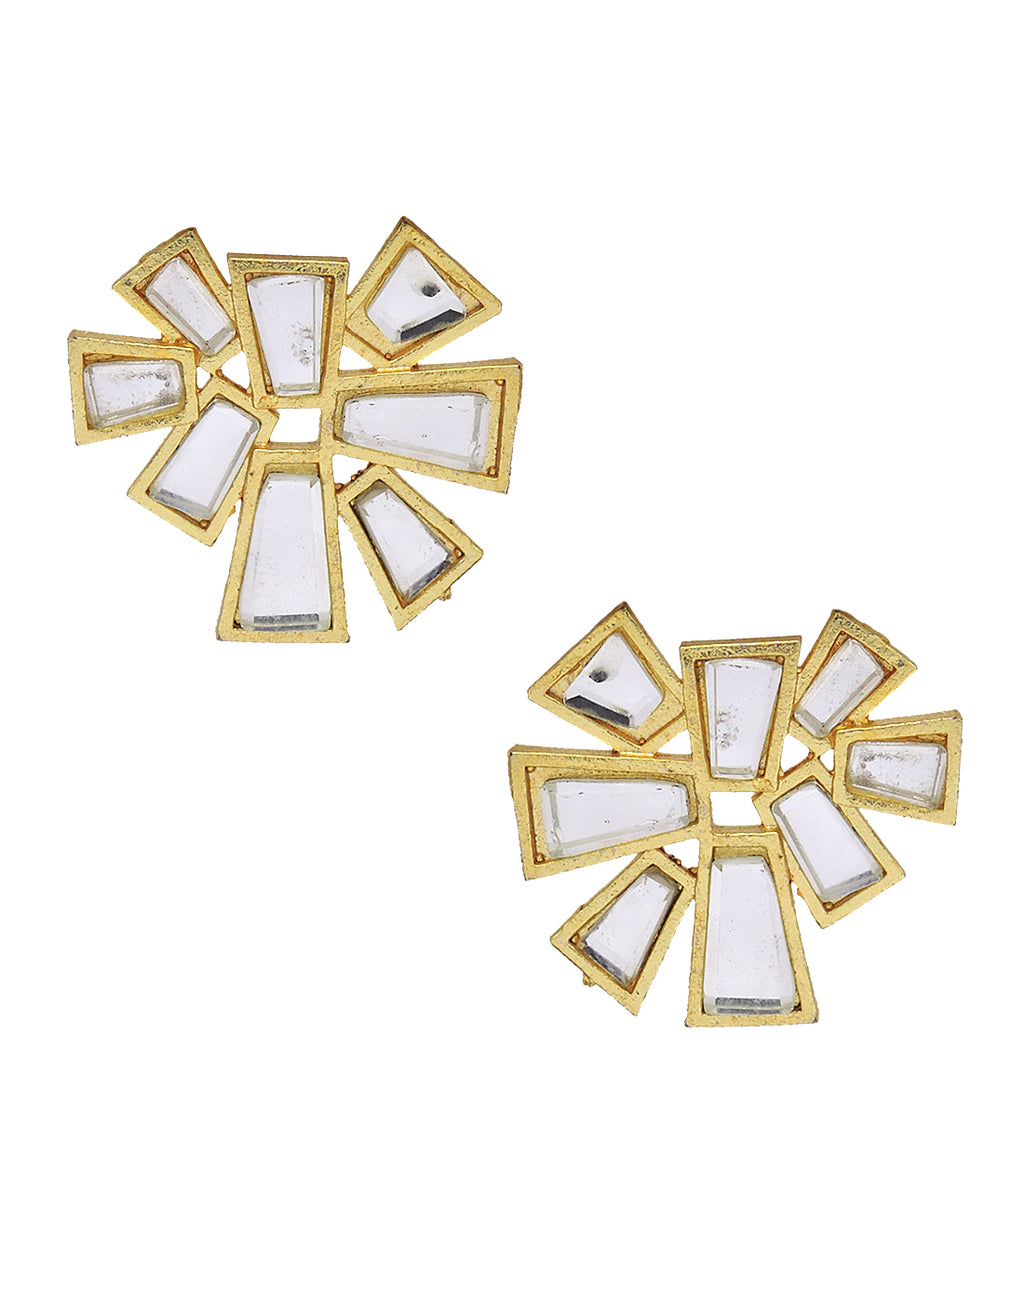 Crystal Cluster Earrings - Statement Earrings - Gold-Plated & Hypoallergenic - Made in India - Dubai Jewellery - Dori